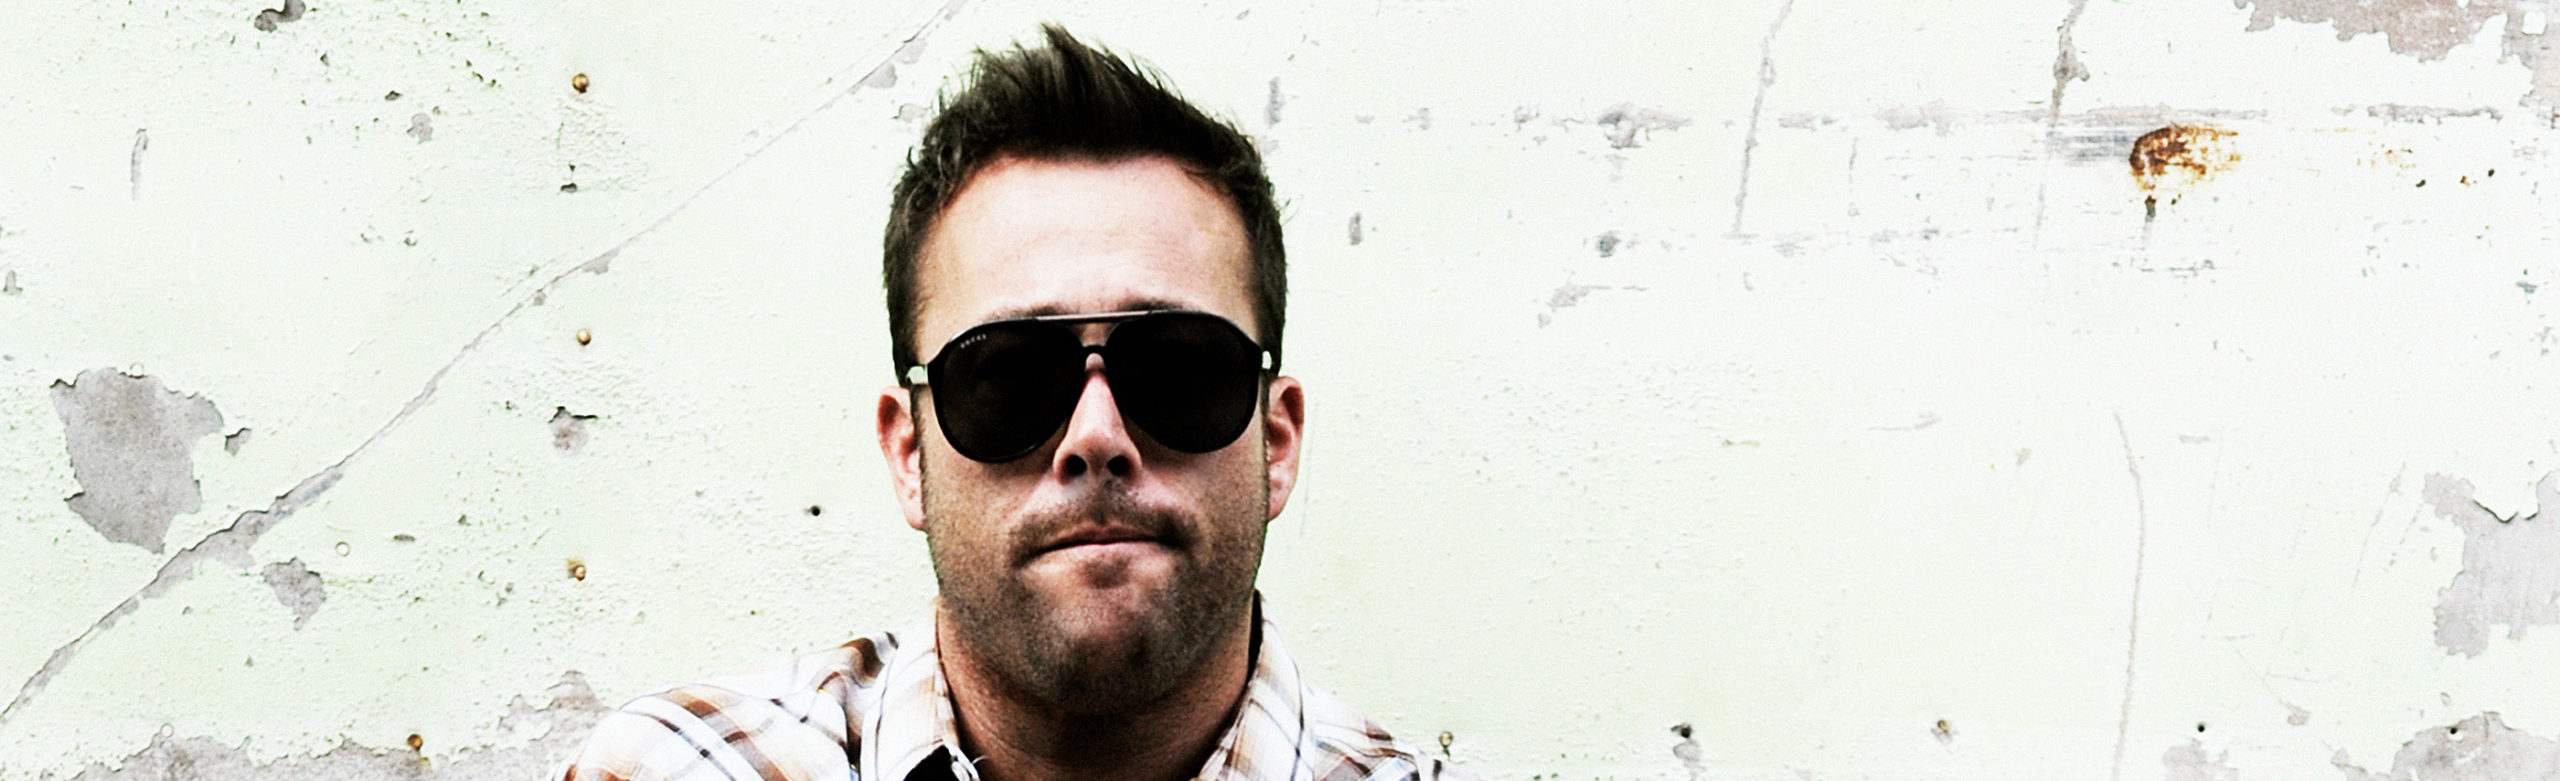 Platinum Selling Country Artist Uncle Kracker to Perform in Missoula Image